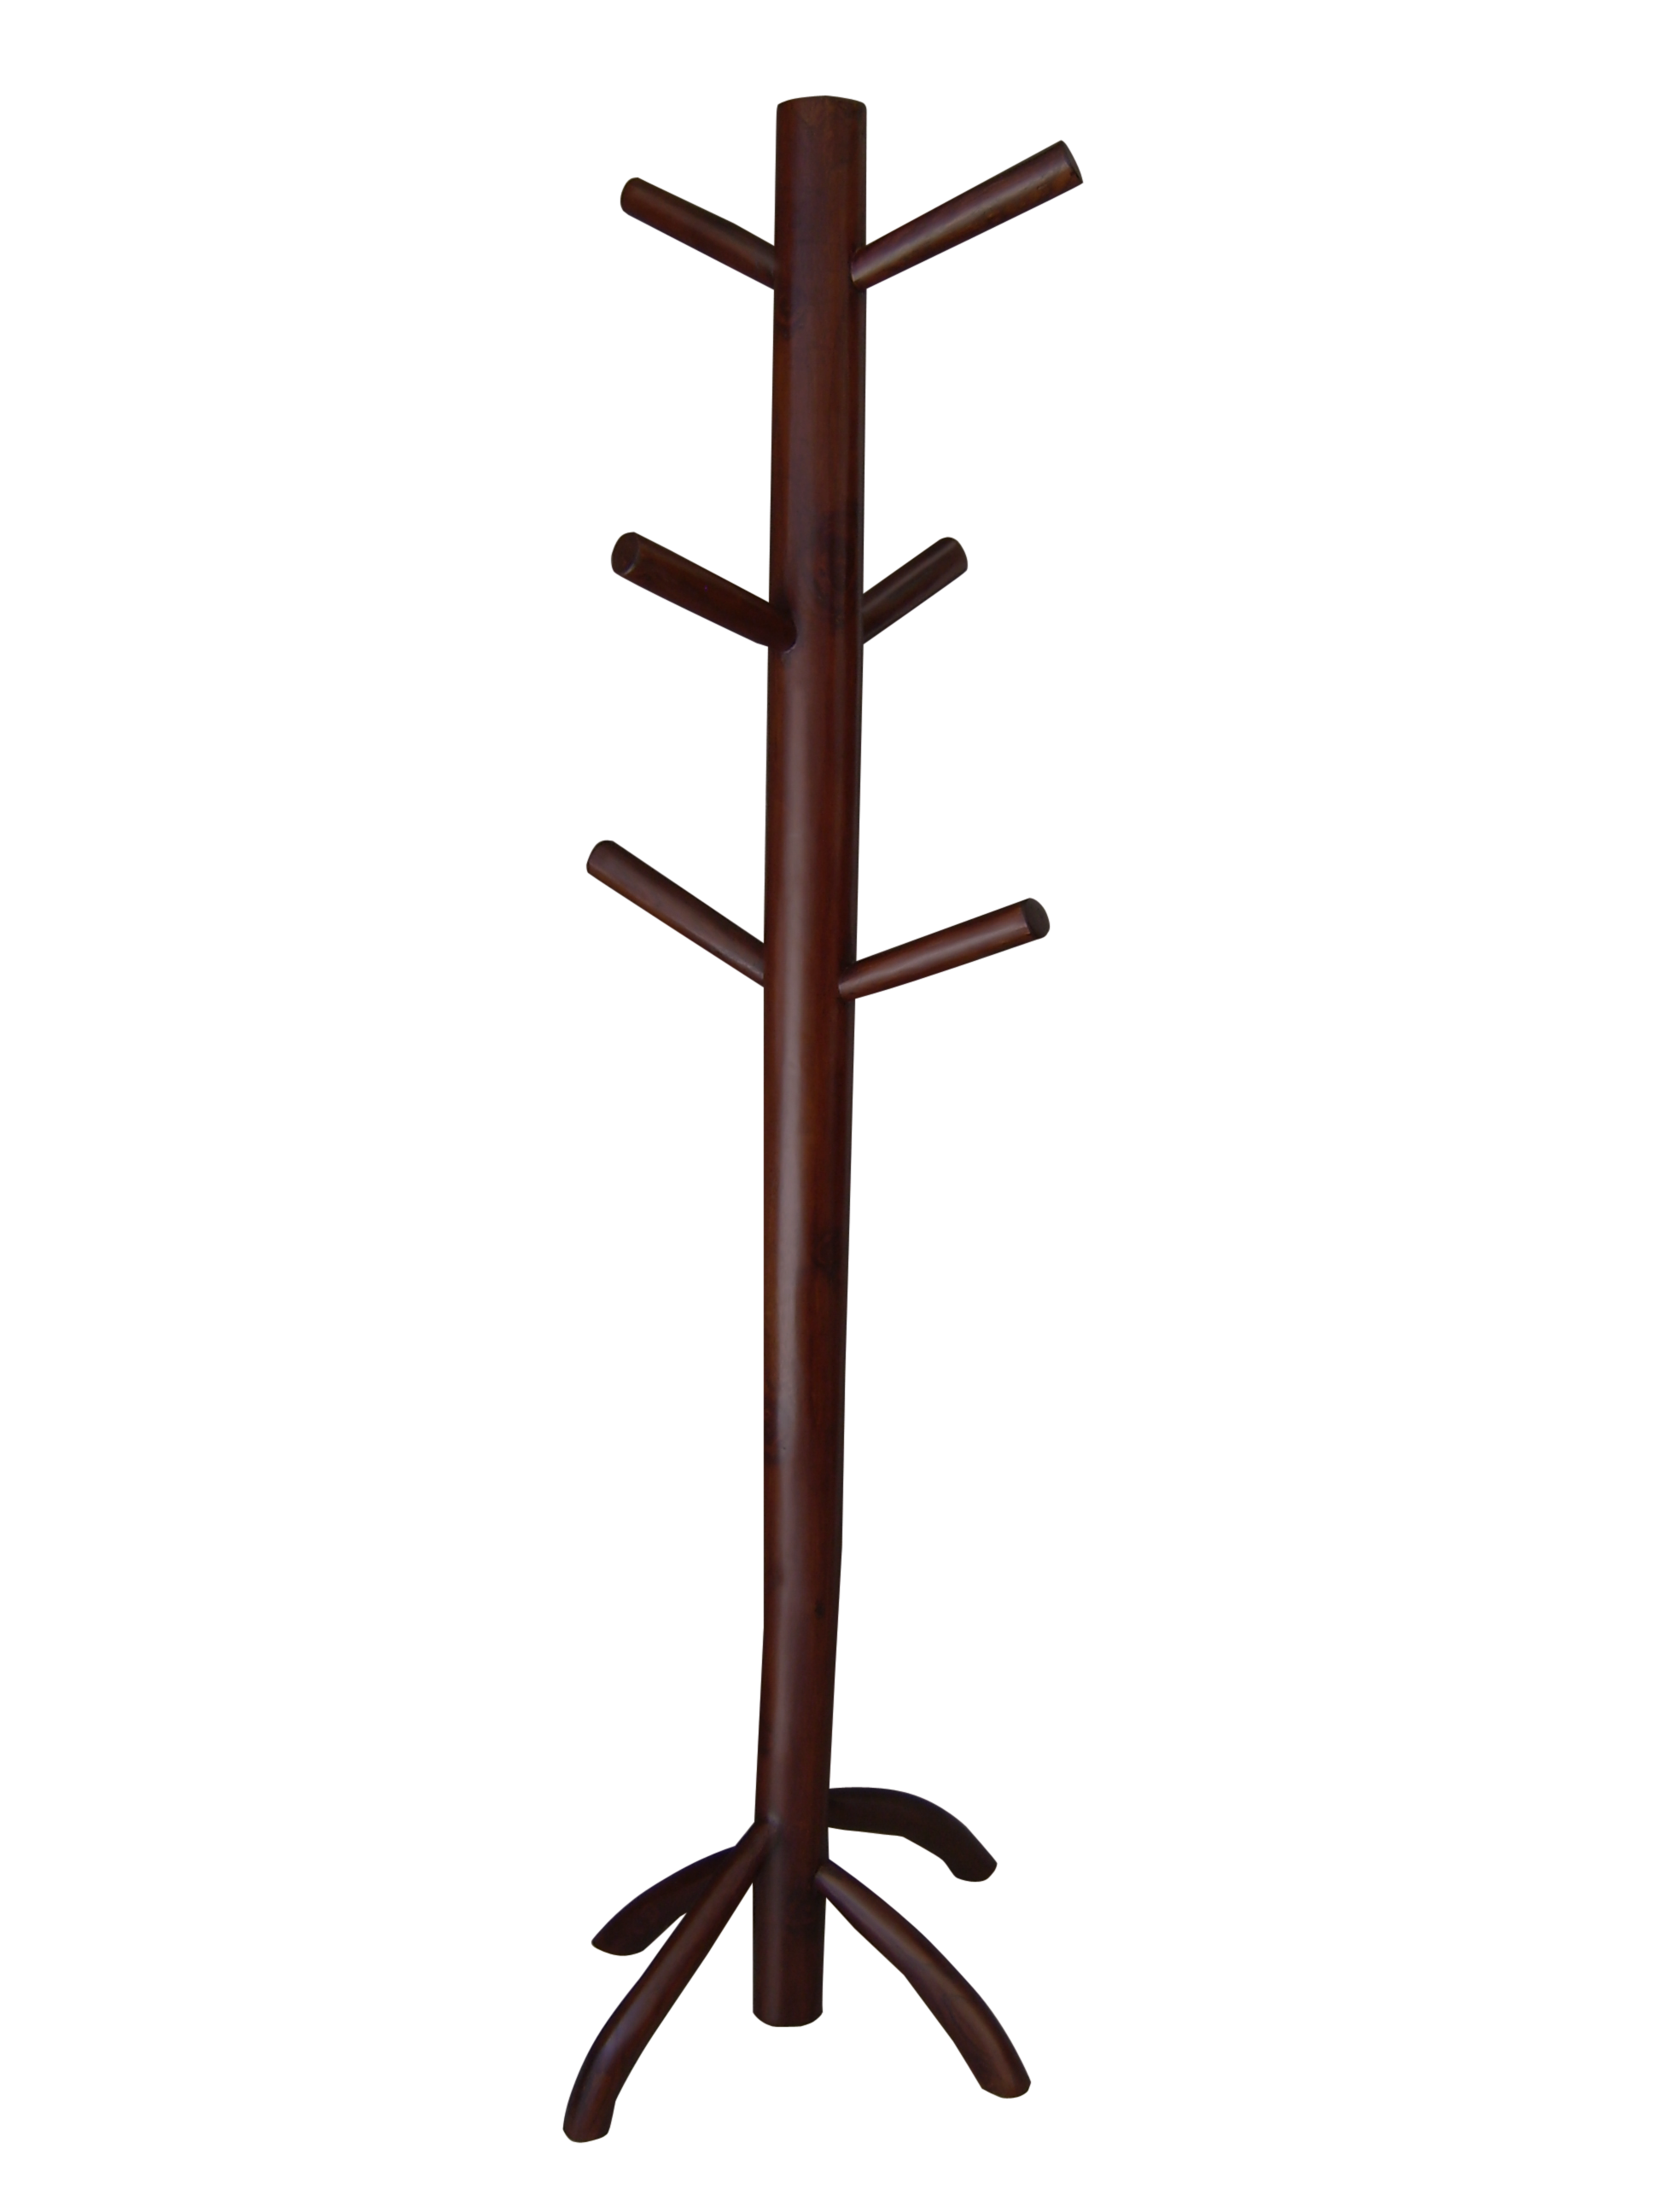 Hat Stand Image Free Transparent Image HD PNG Image